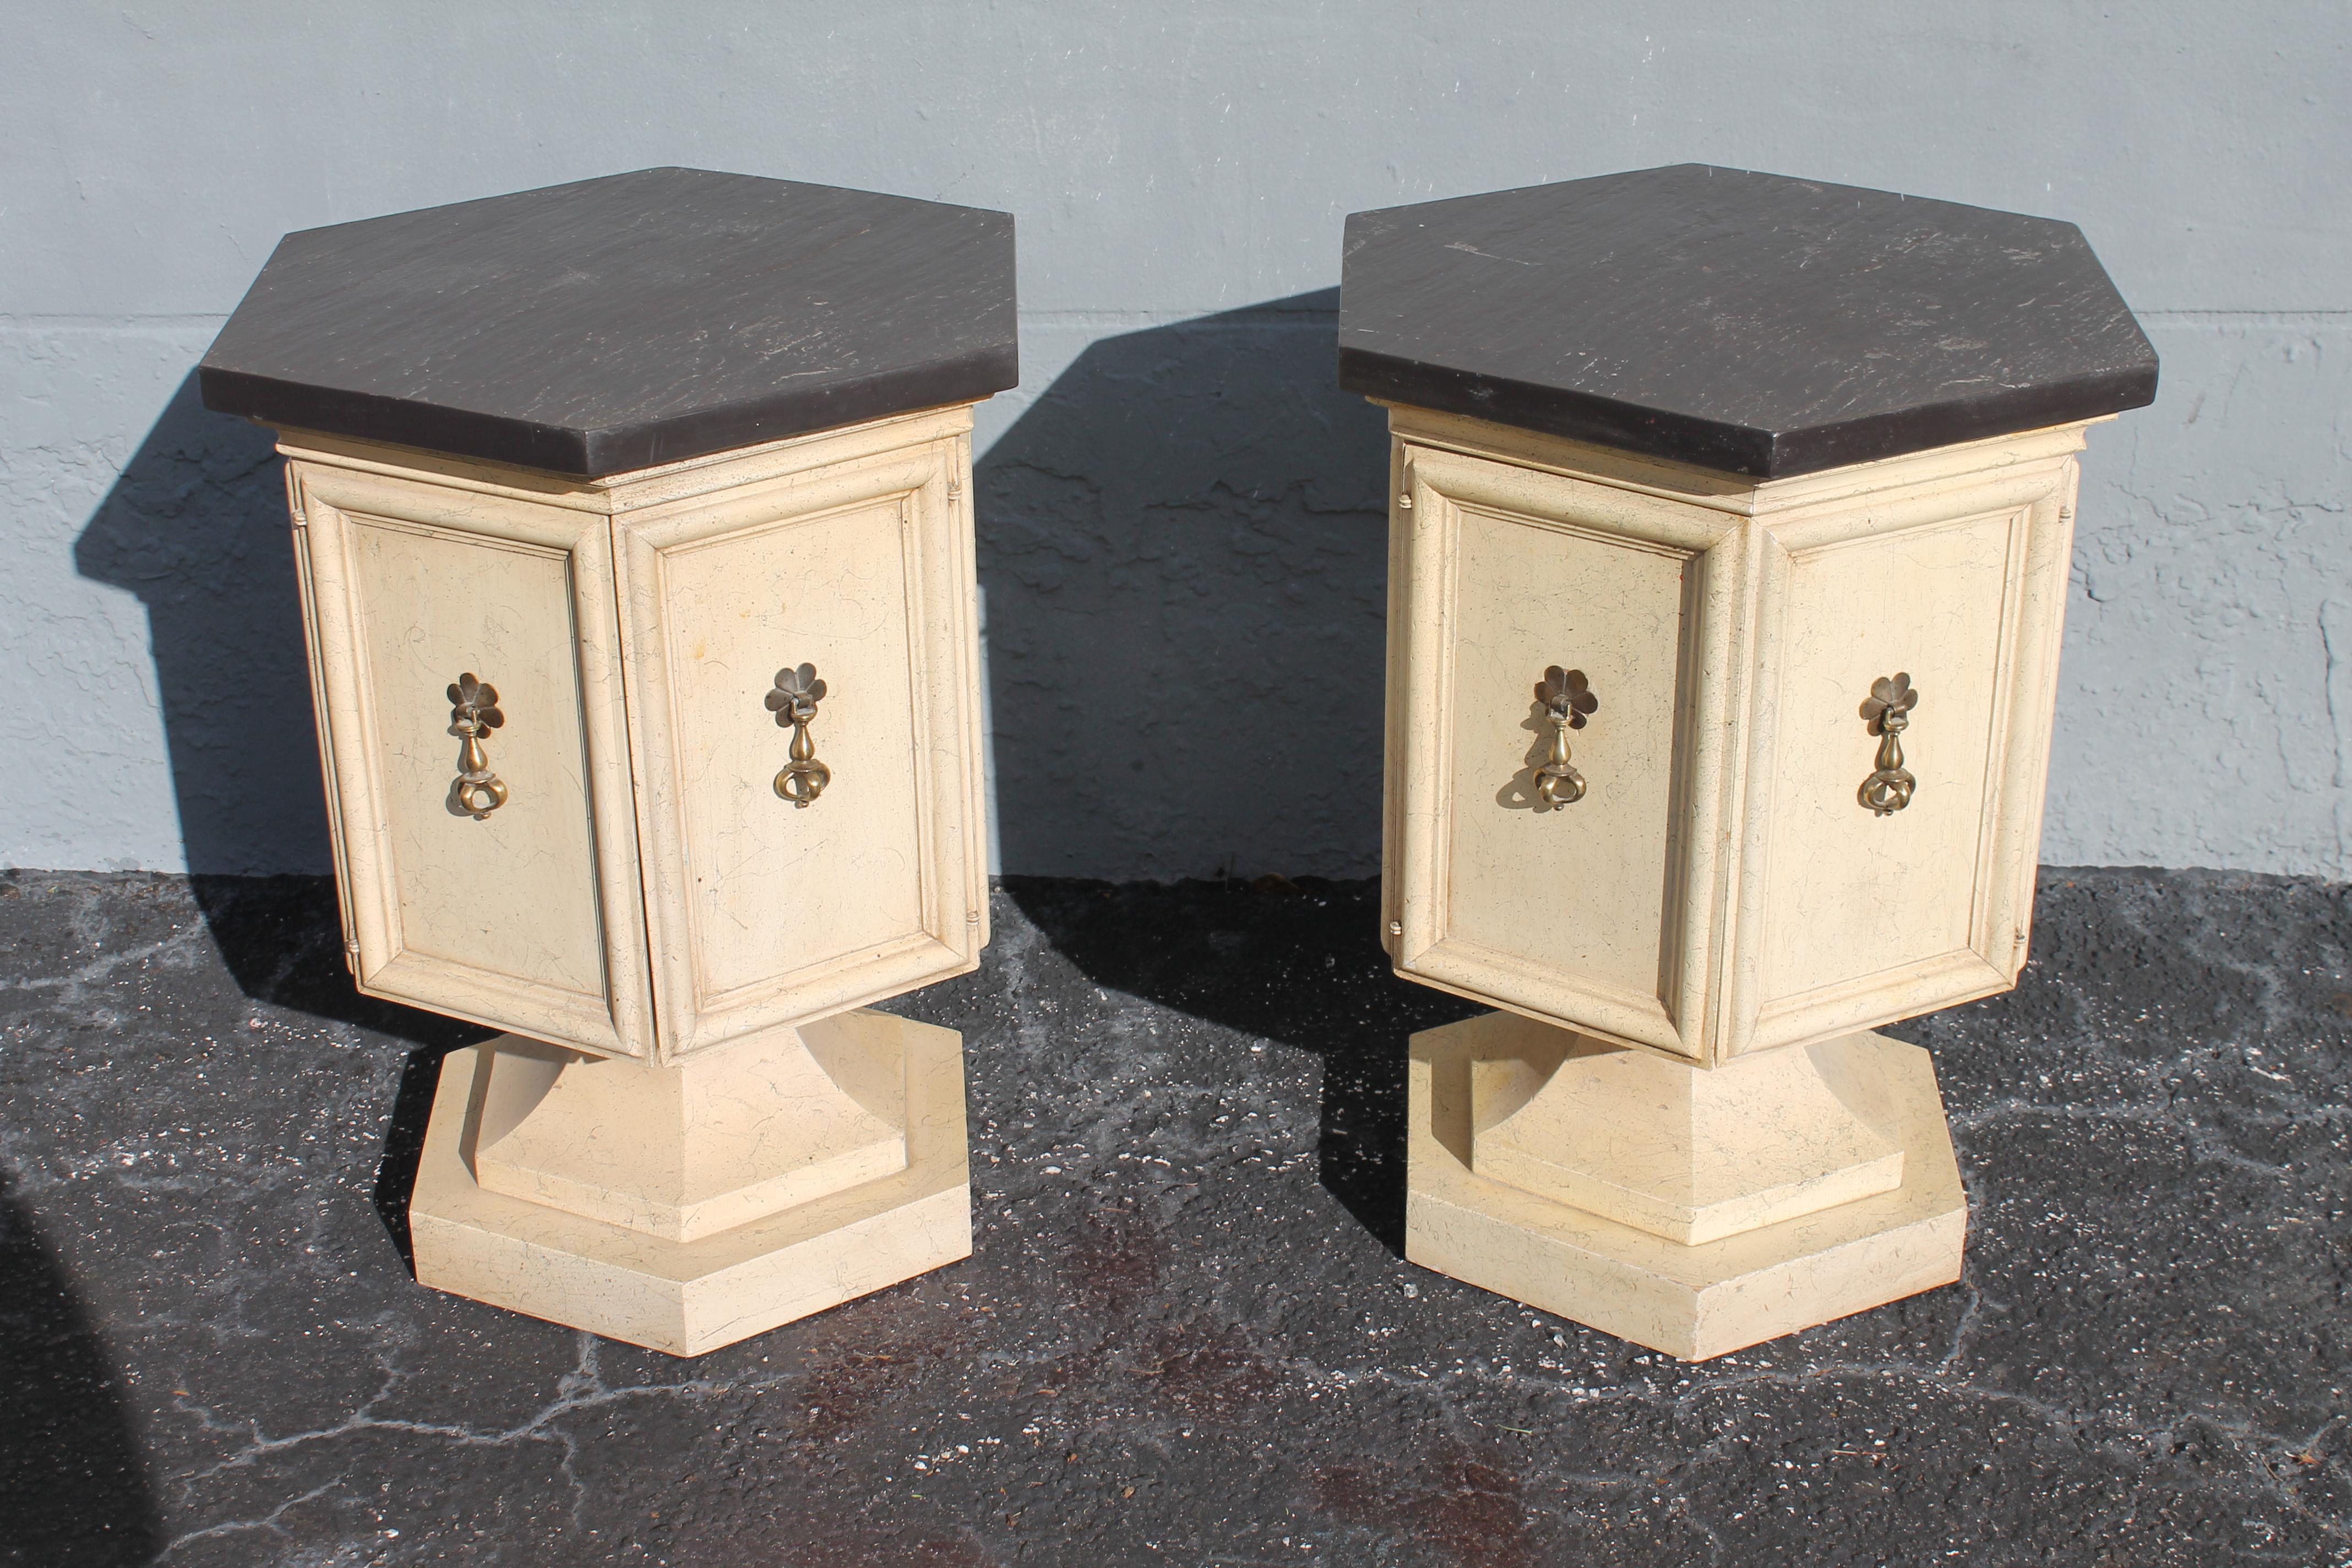 A Pair of Mid Century Modern Off White Pedestal Hexagonal Side Tables, Accent Tables. Slate stone tops on these beautiful tables.